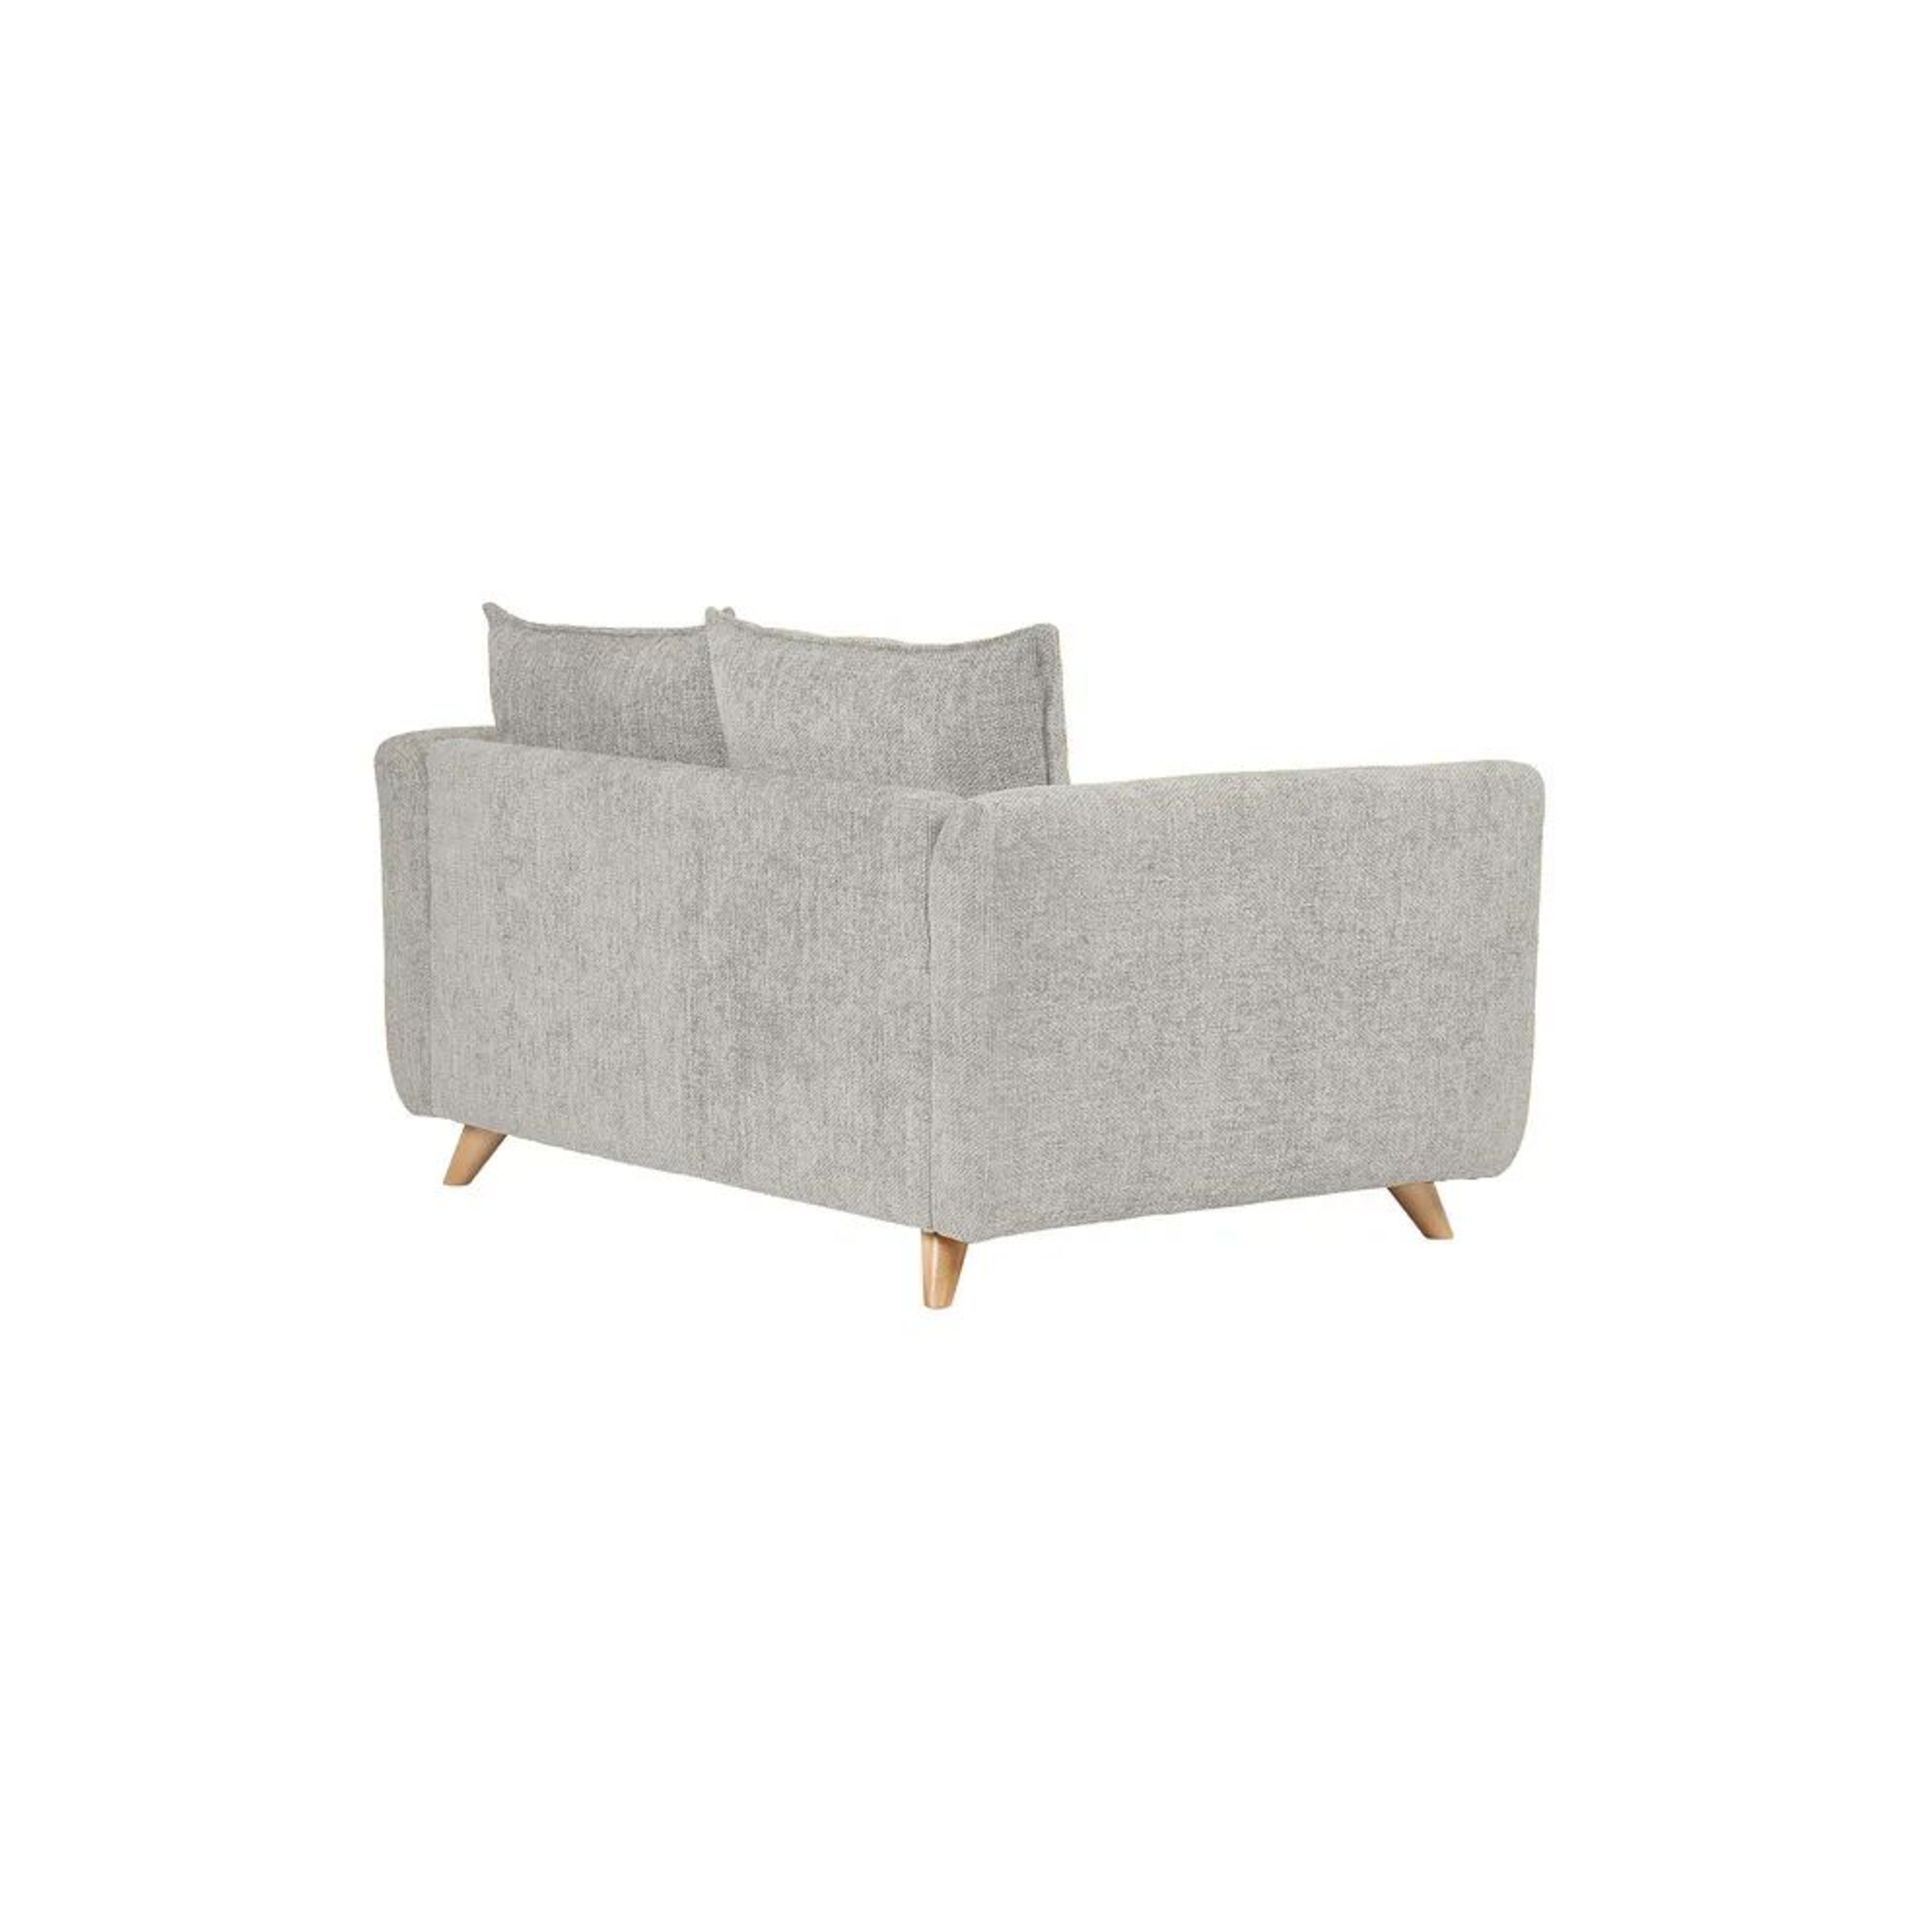 BRAND NEW DALBY 2 Seater Sofa - SILVER FABRIC. RRP £1569. Our Dalby 2-seater sofa, shown here in - Image 3 of 8